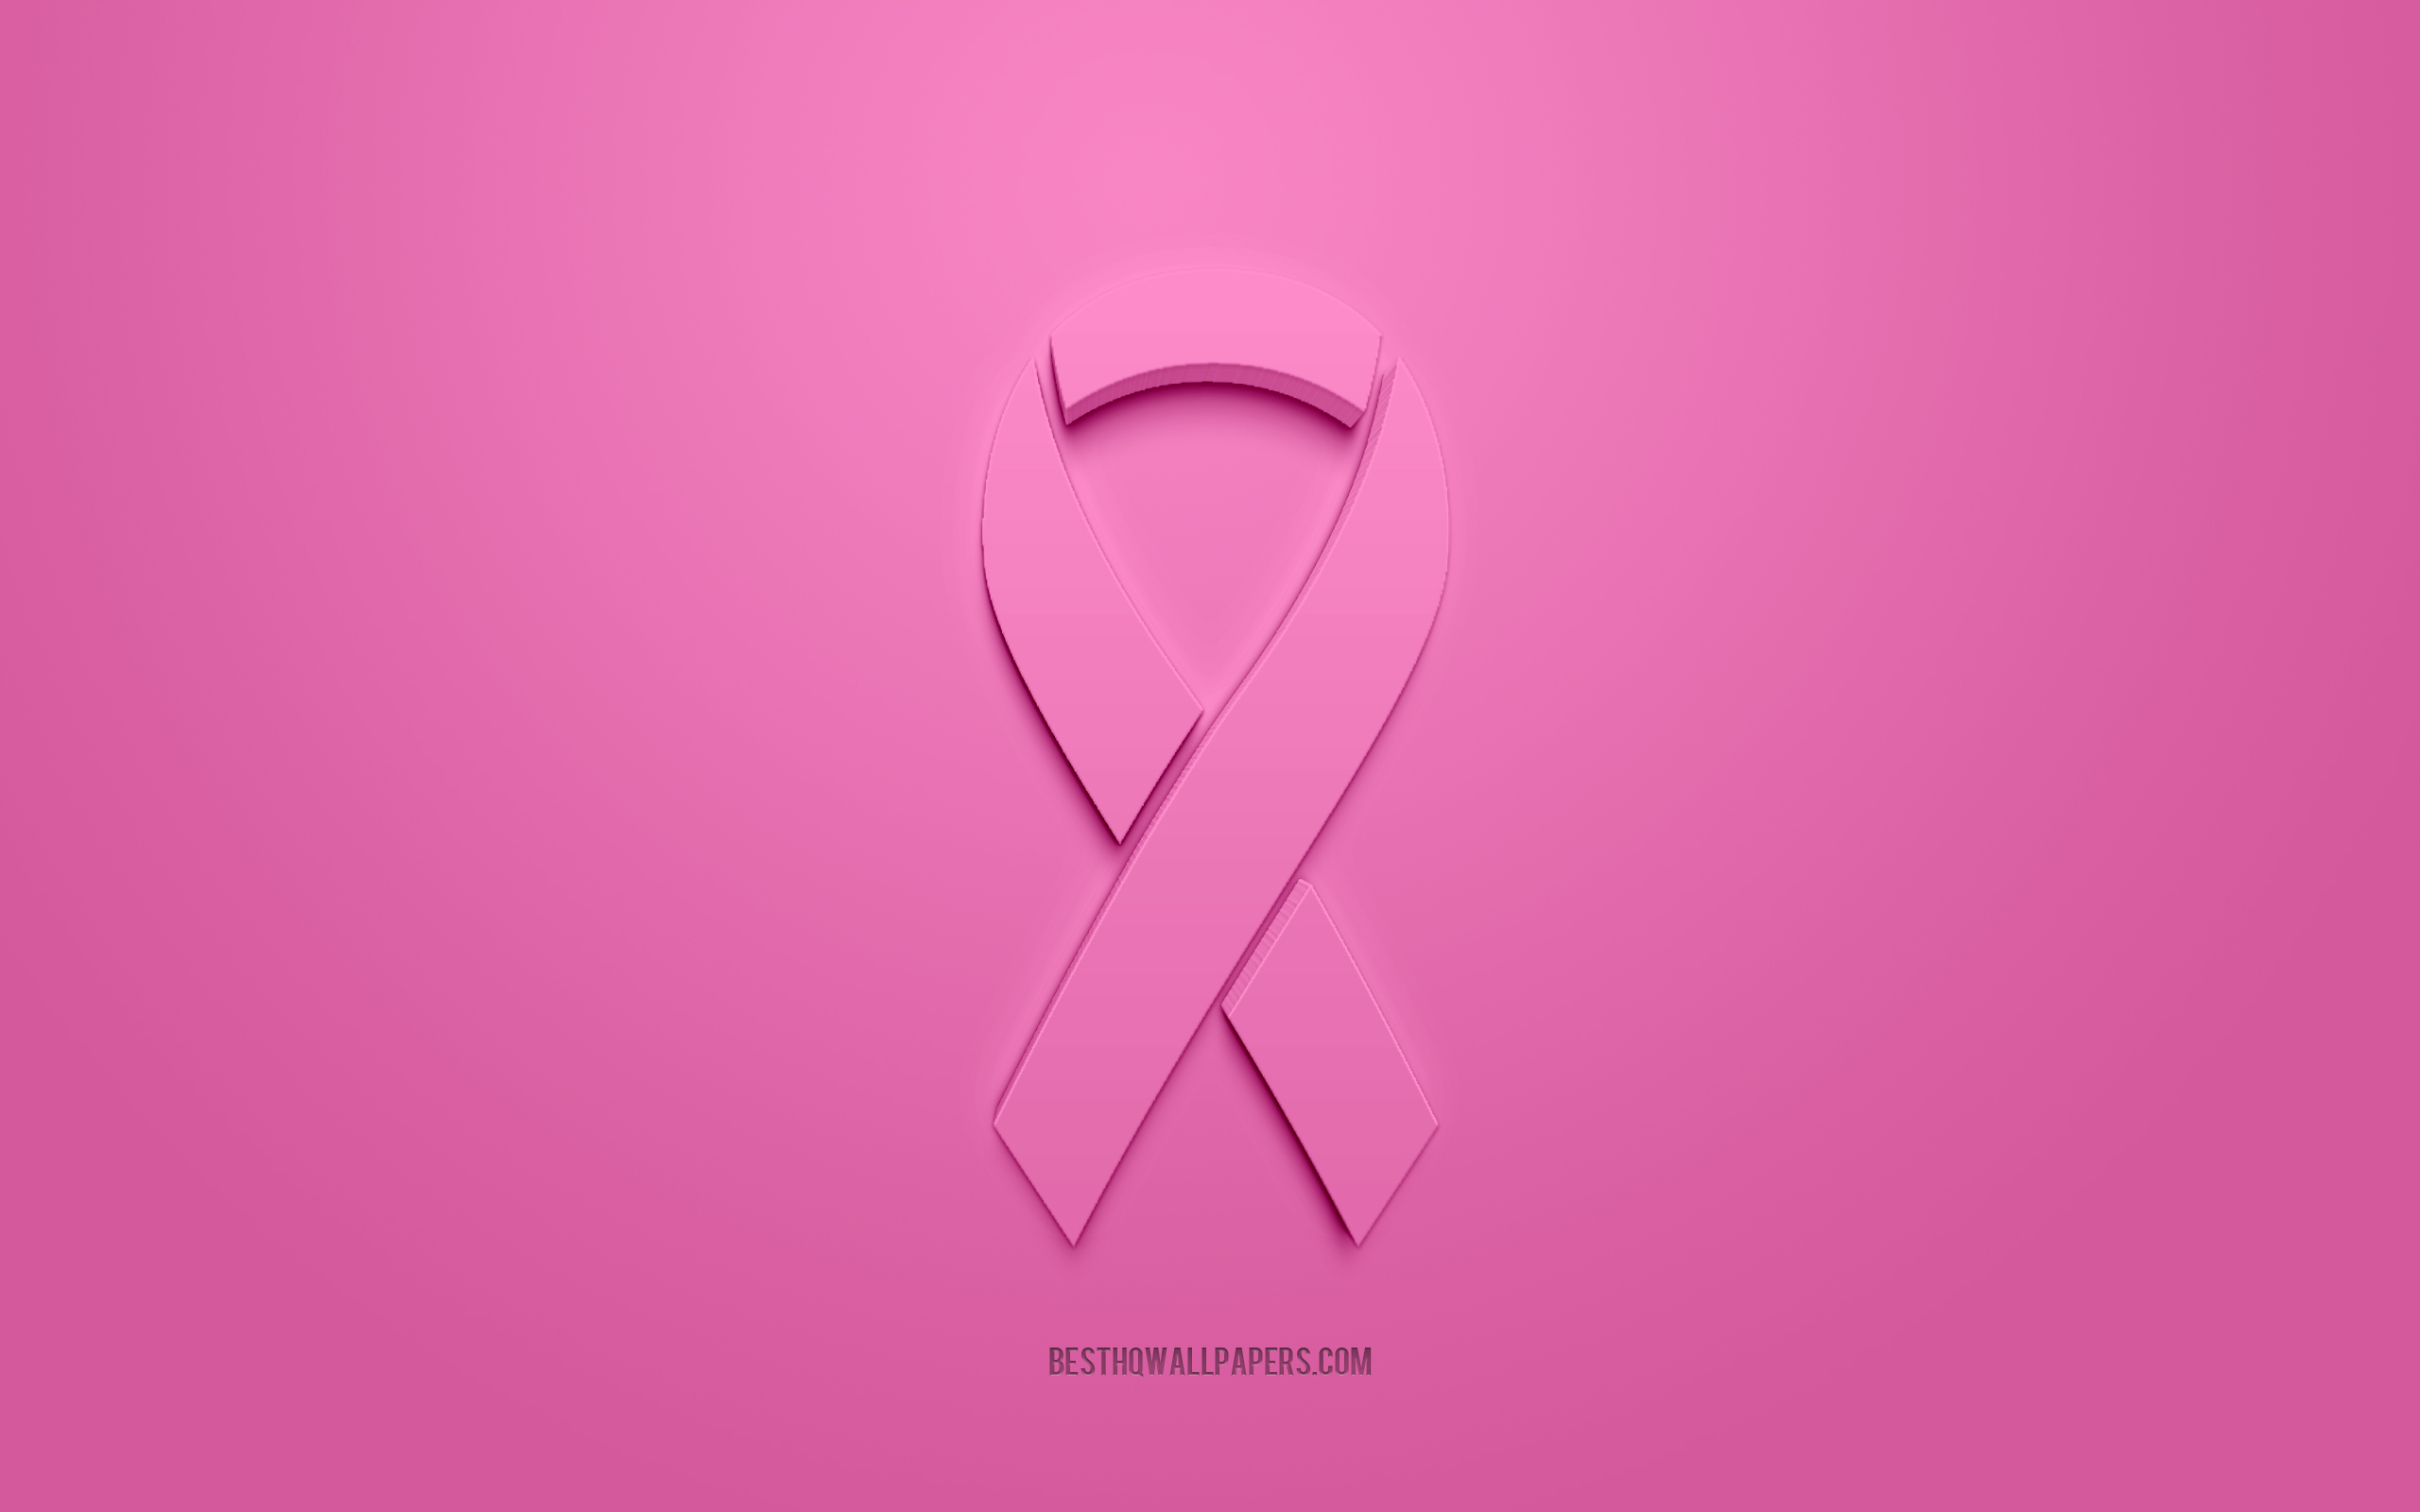 Download wallpapers Breast Cancer ribbon creative 3D logo pink 3d ribbon Breast  Cancer Awareness ribbon Breast Cancer pink background Cancer ribbons  Awareness ribbons for desktop with resolution 2560x1600 High Quality HD  pictures